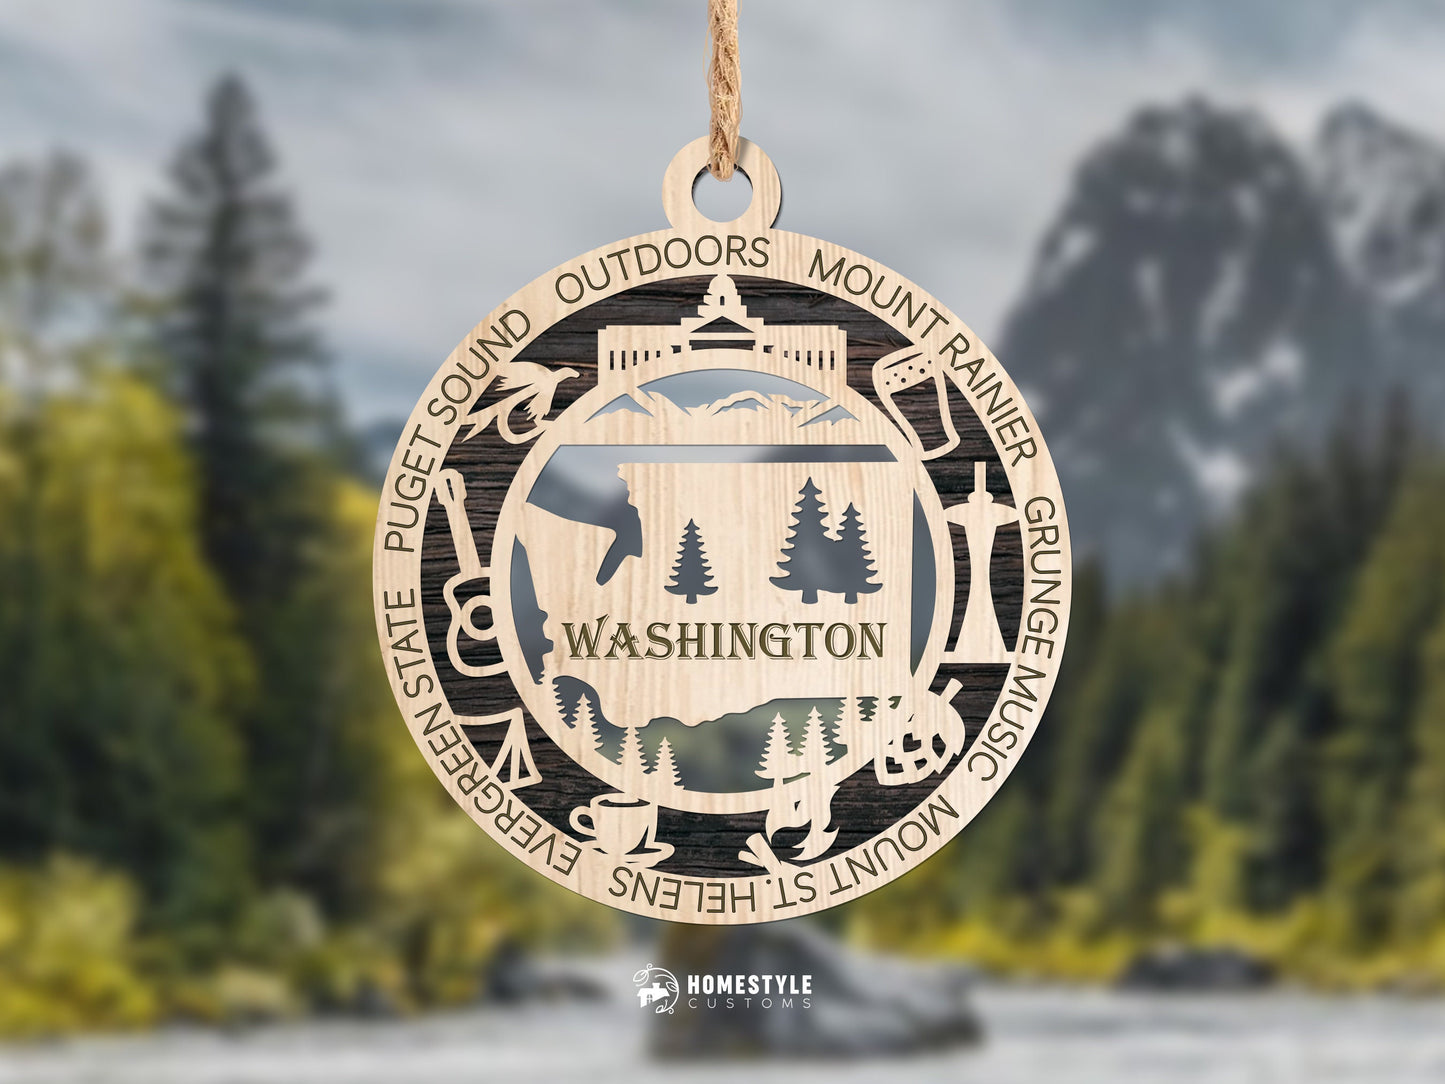 Washington State Ornament - SVG File Download - Sized for Glowforge - Laser Ready Digital Files